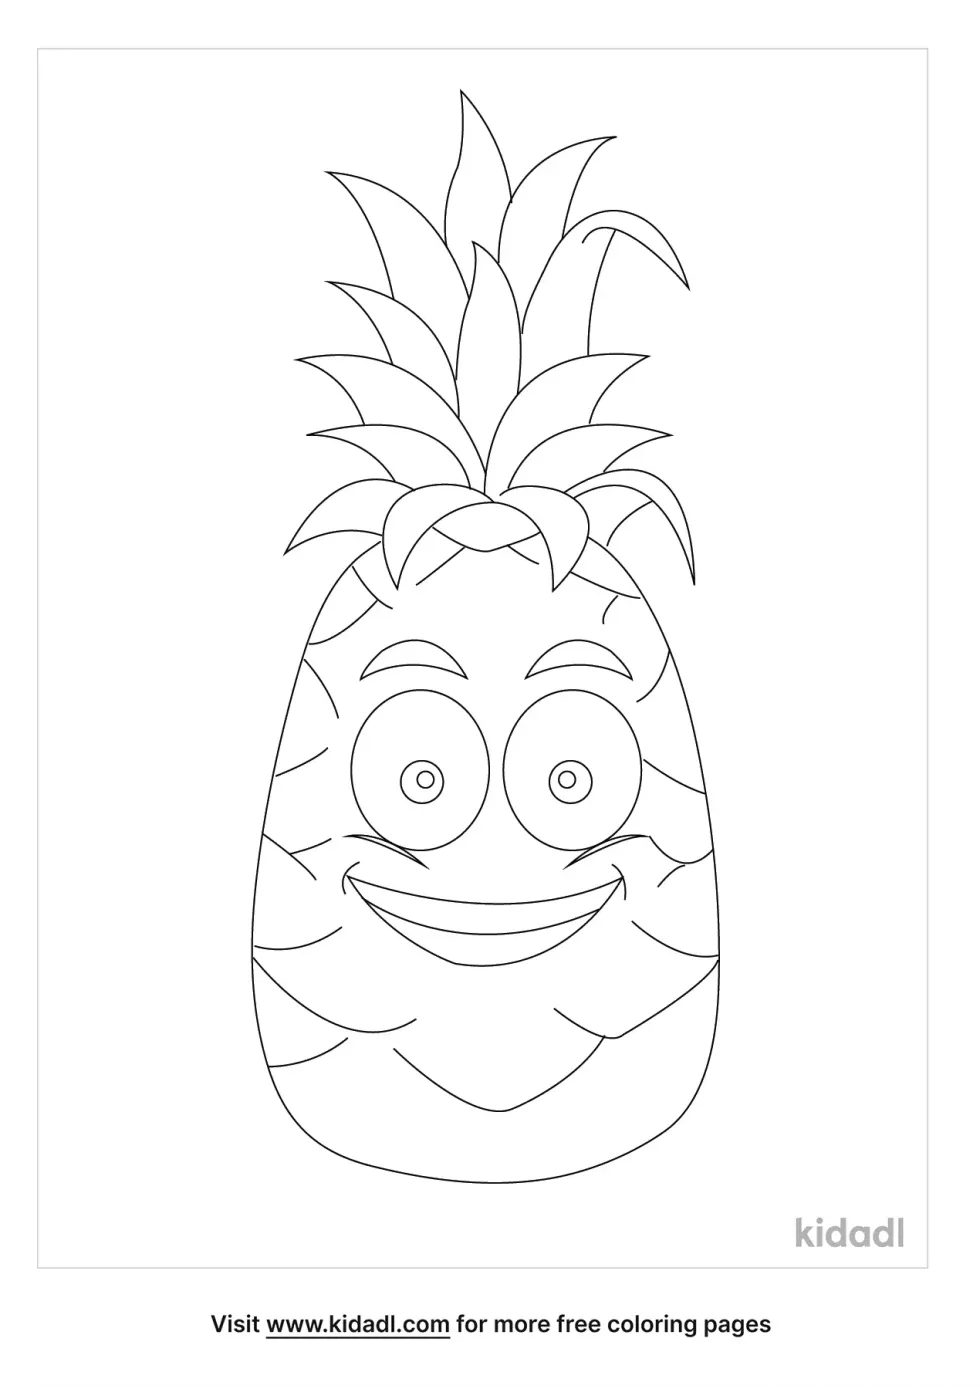 Pineapple With Smiley Face